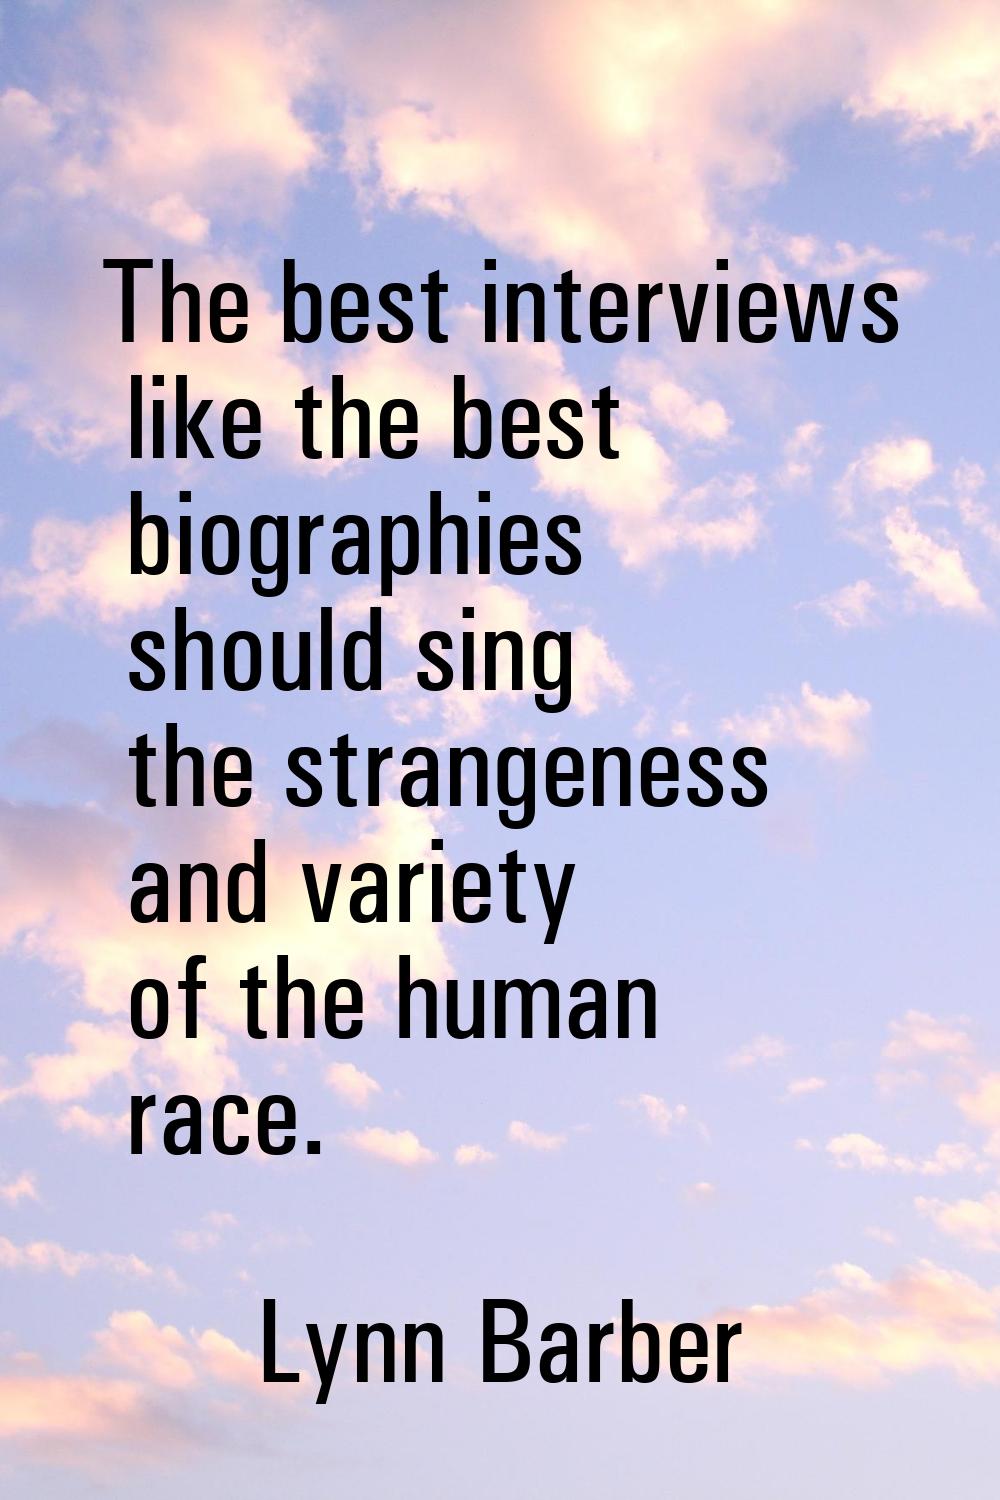 The best interviews like the best biographies should sing the strangeness and variety of the human 